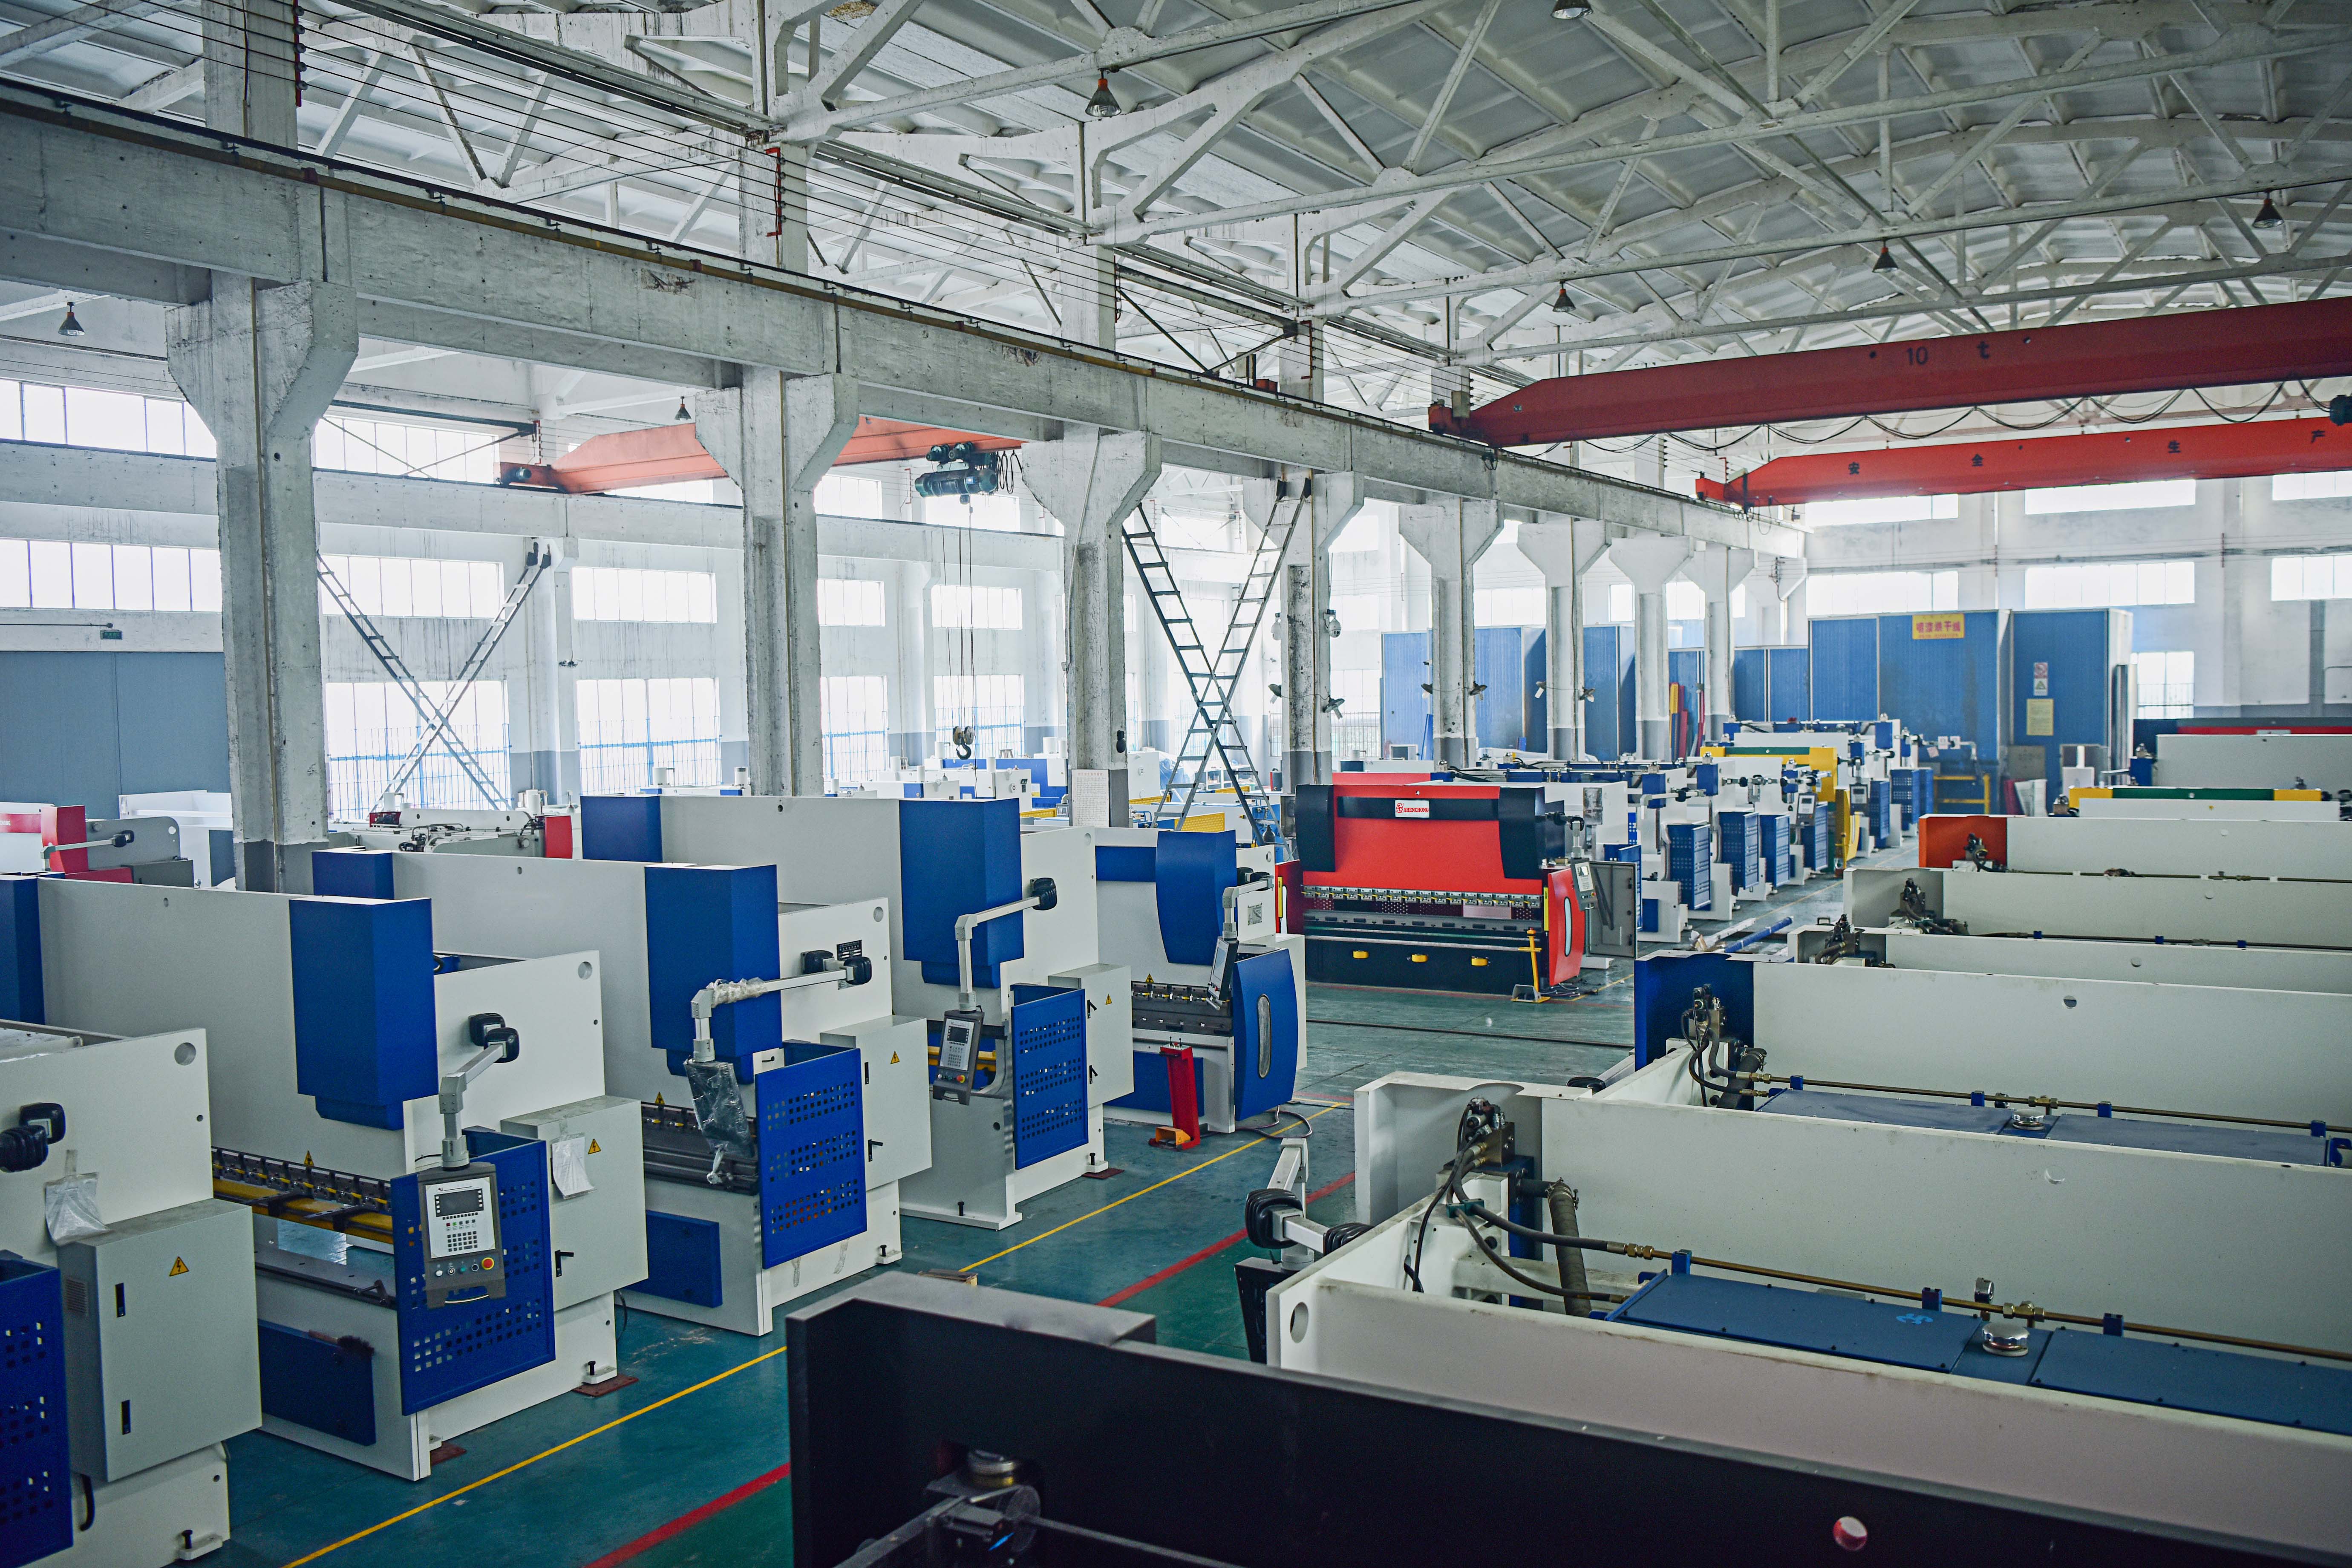 hydraulic bending machines manufacturing factory workshop